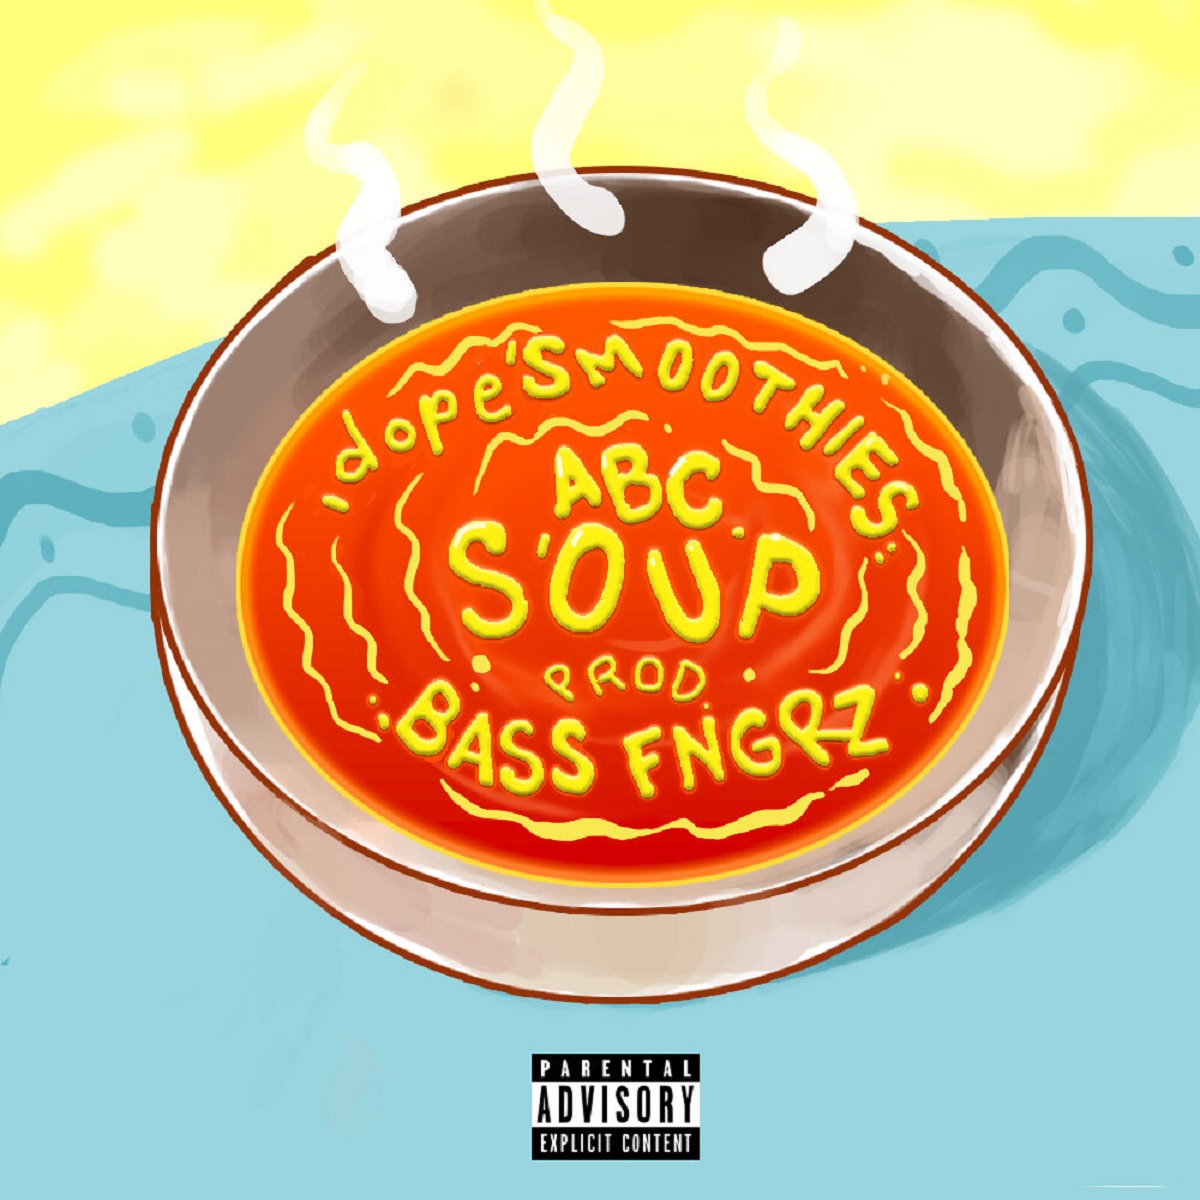 dopeSMOOTHIES returns with his single, "ABC Soup," following his viral success.